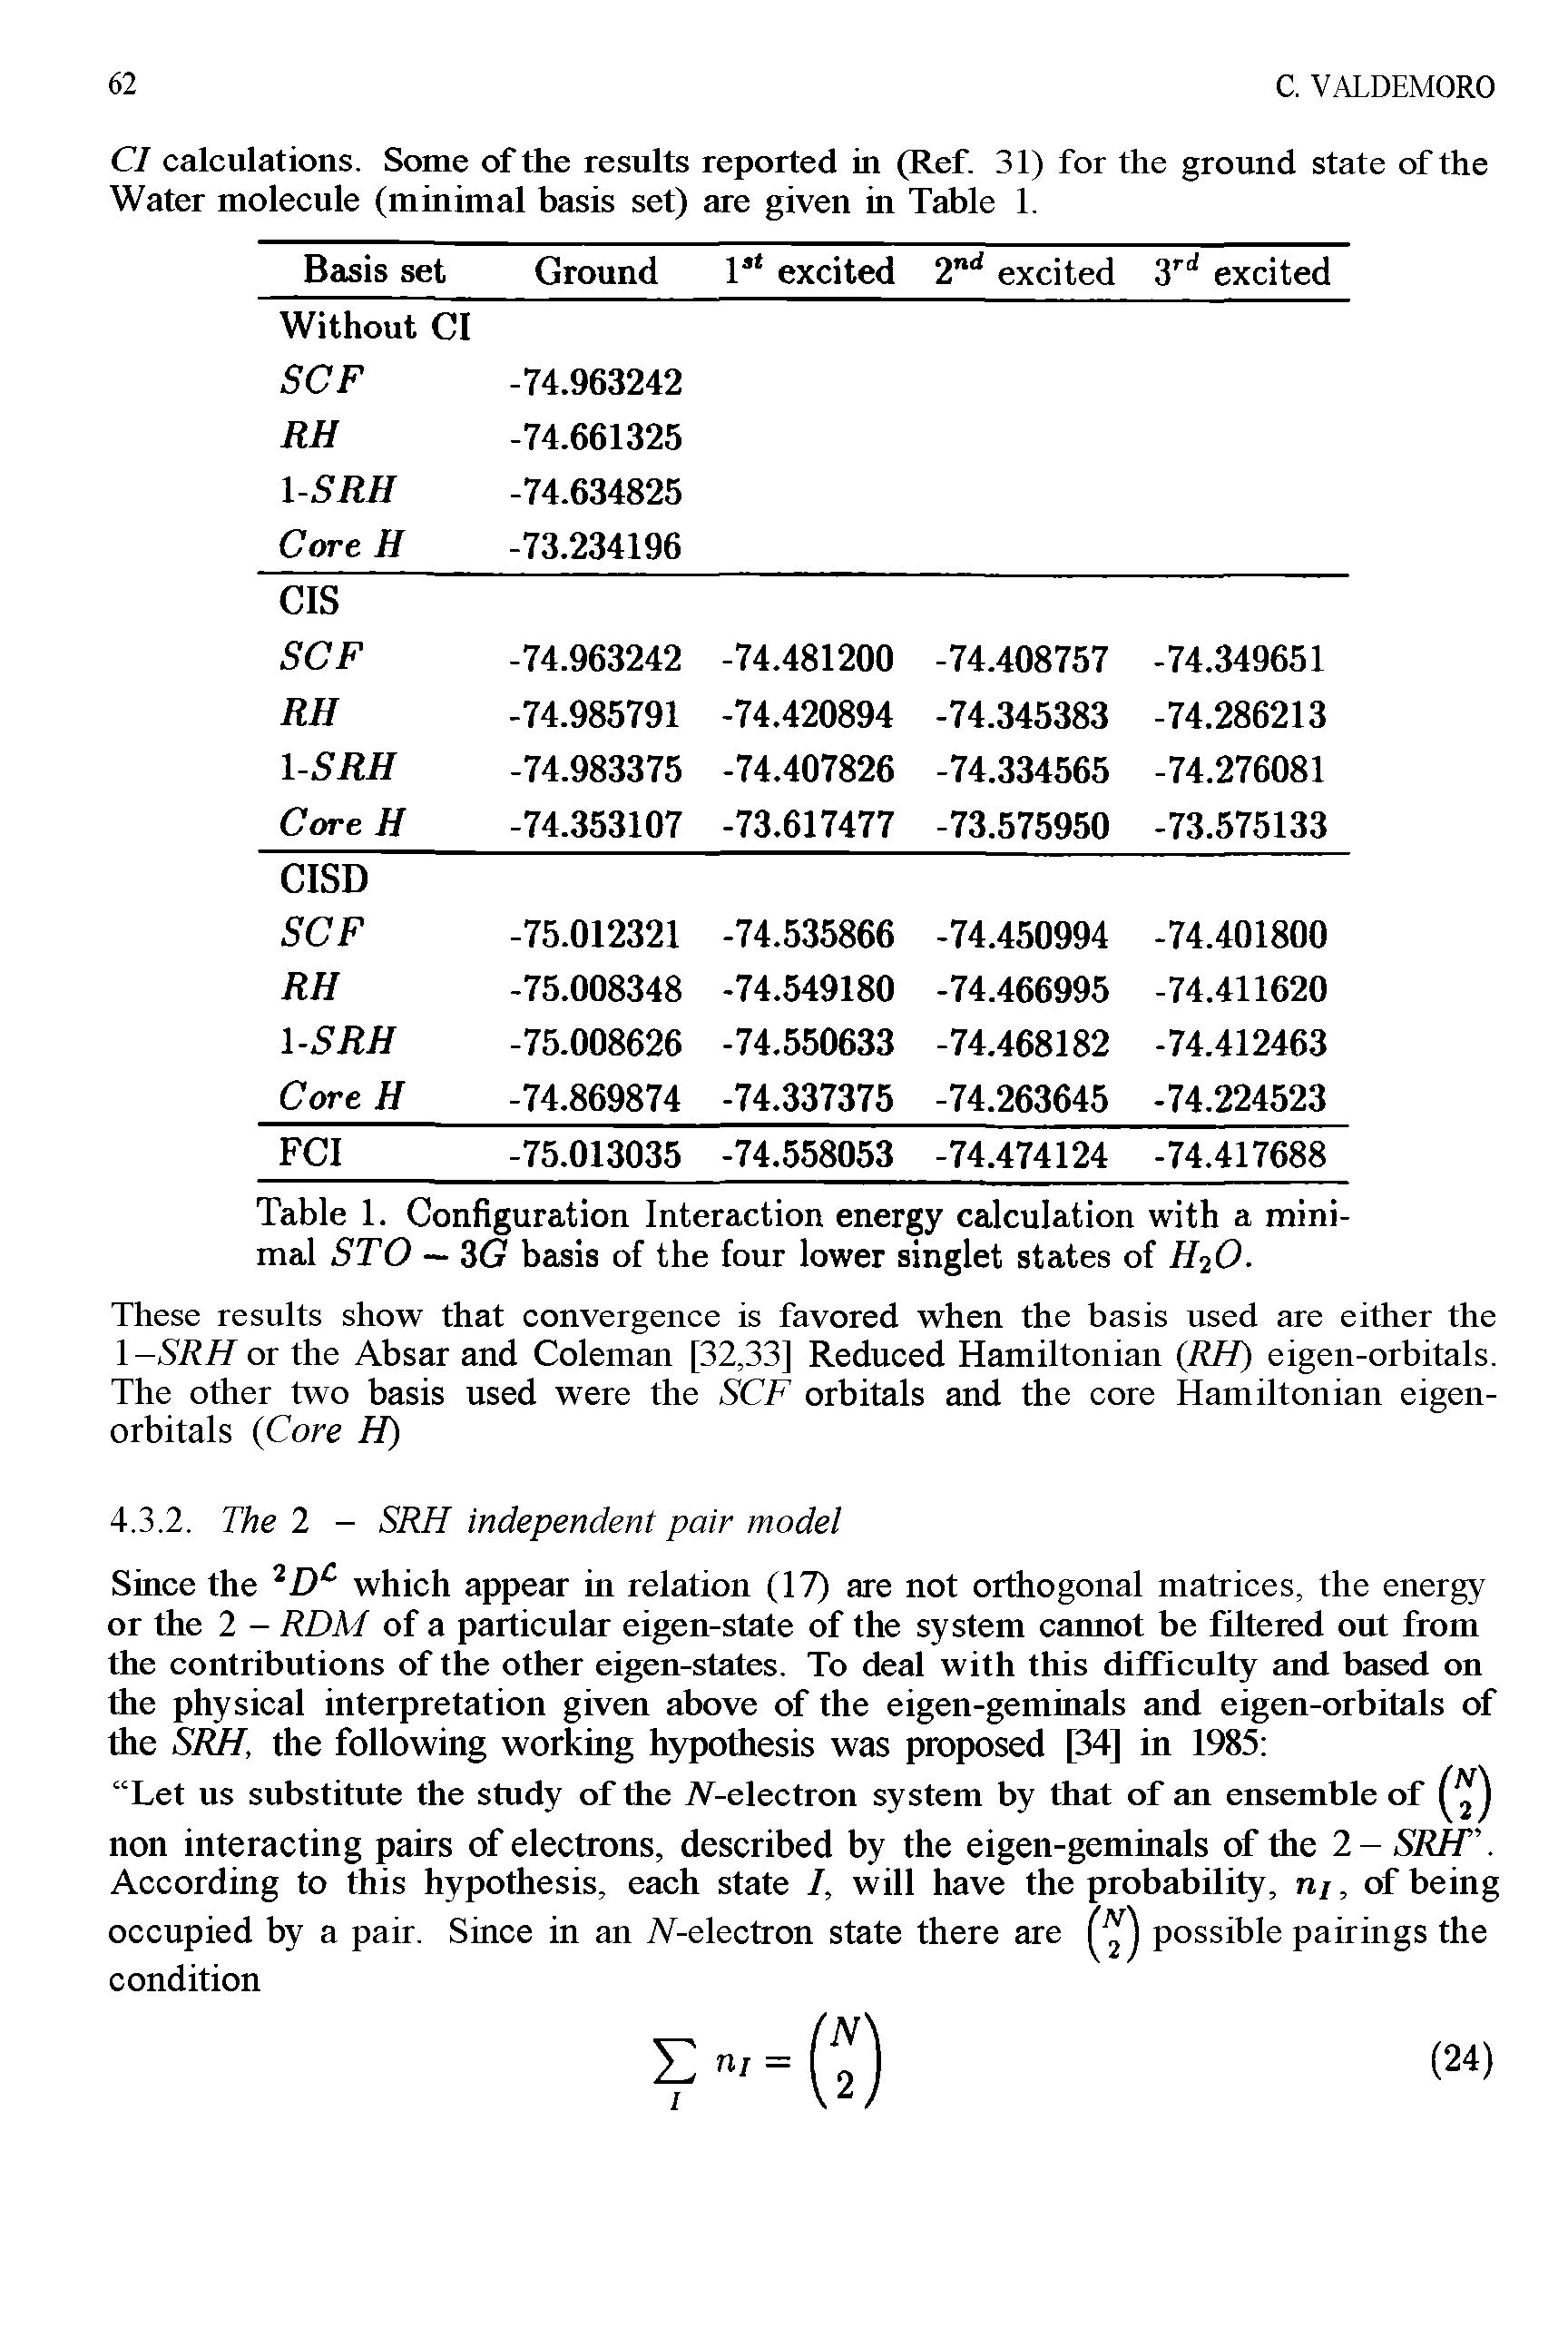 Table 1. Configuration Interaction energy calculation with a minimal STO — 3G basis of the four lower singlet states of H2O.